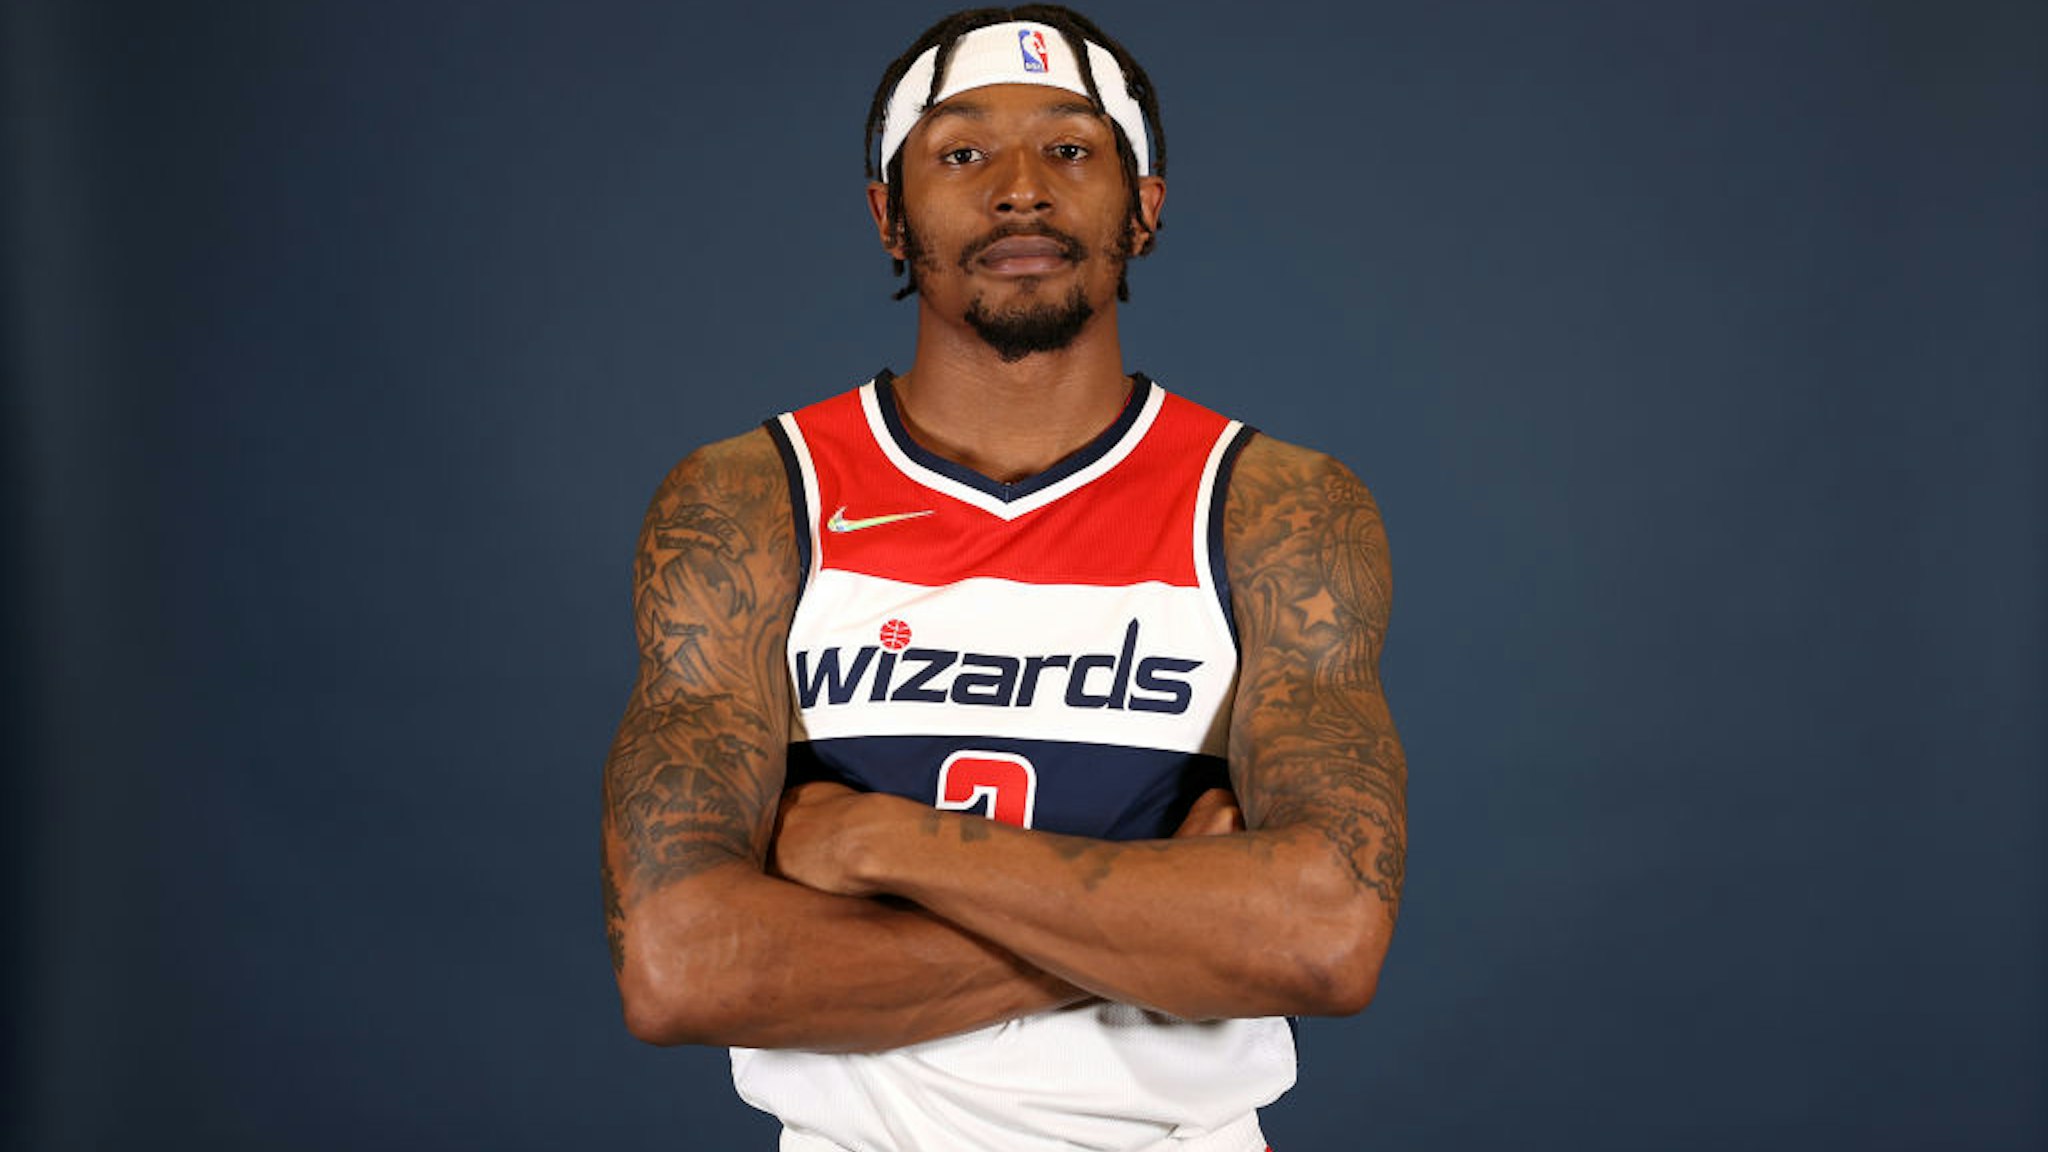 WASHINGTON, DC - SEPTEMBER 27: Bradley Beal #3 of the Washington Wizards poses during media day at Entertainment &amp; Sports Arena on September 27, 2021 in Washington, DC. NOTE TO USER: User expressly acknowledges and agrees that, by downloading and or using this photograph, User is consenting to the terms and conditions of the Getty Images License Agreement. (Photo by Rob Carr/Getty Images)